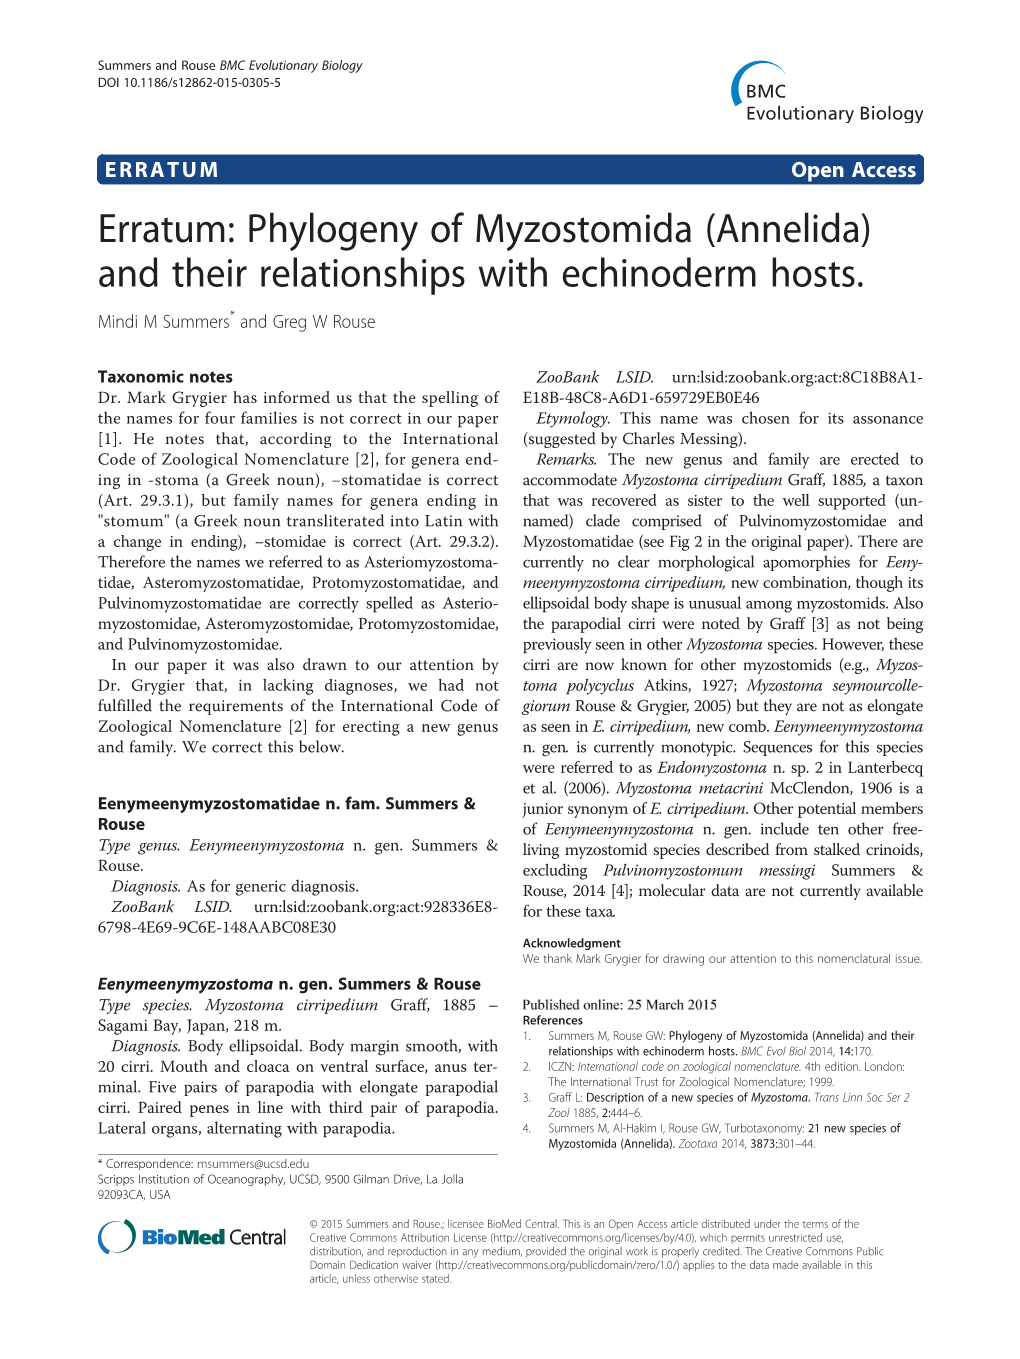 Phylogeny of Myzostomida (Annelida) and Their Relationships with Echinoderm Hosts